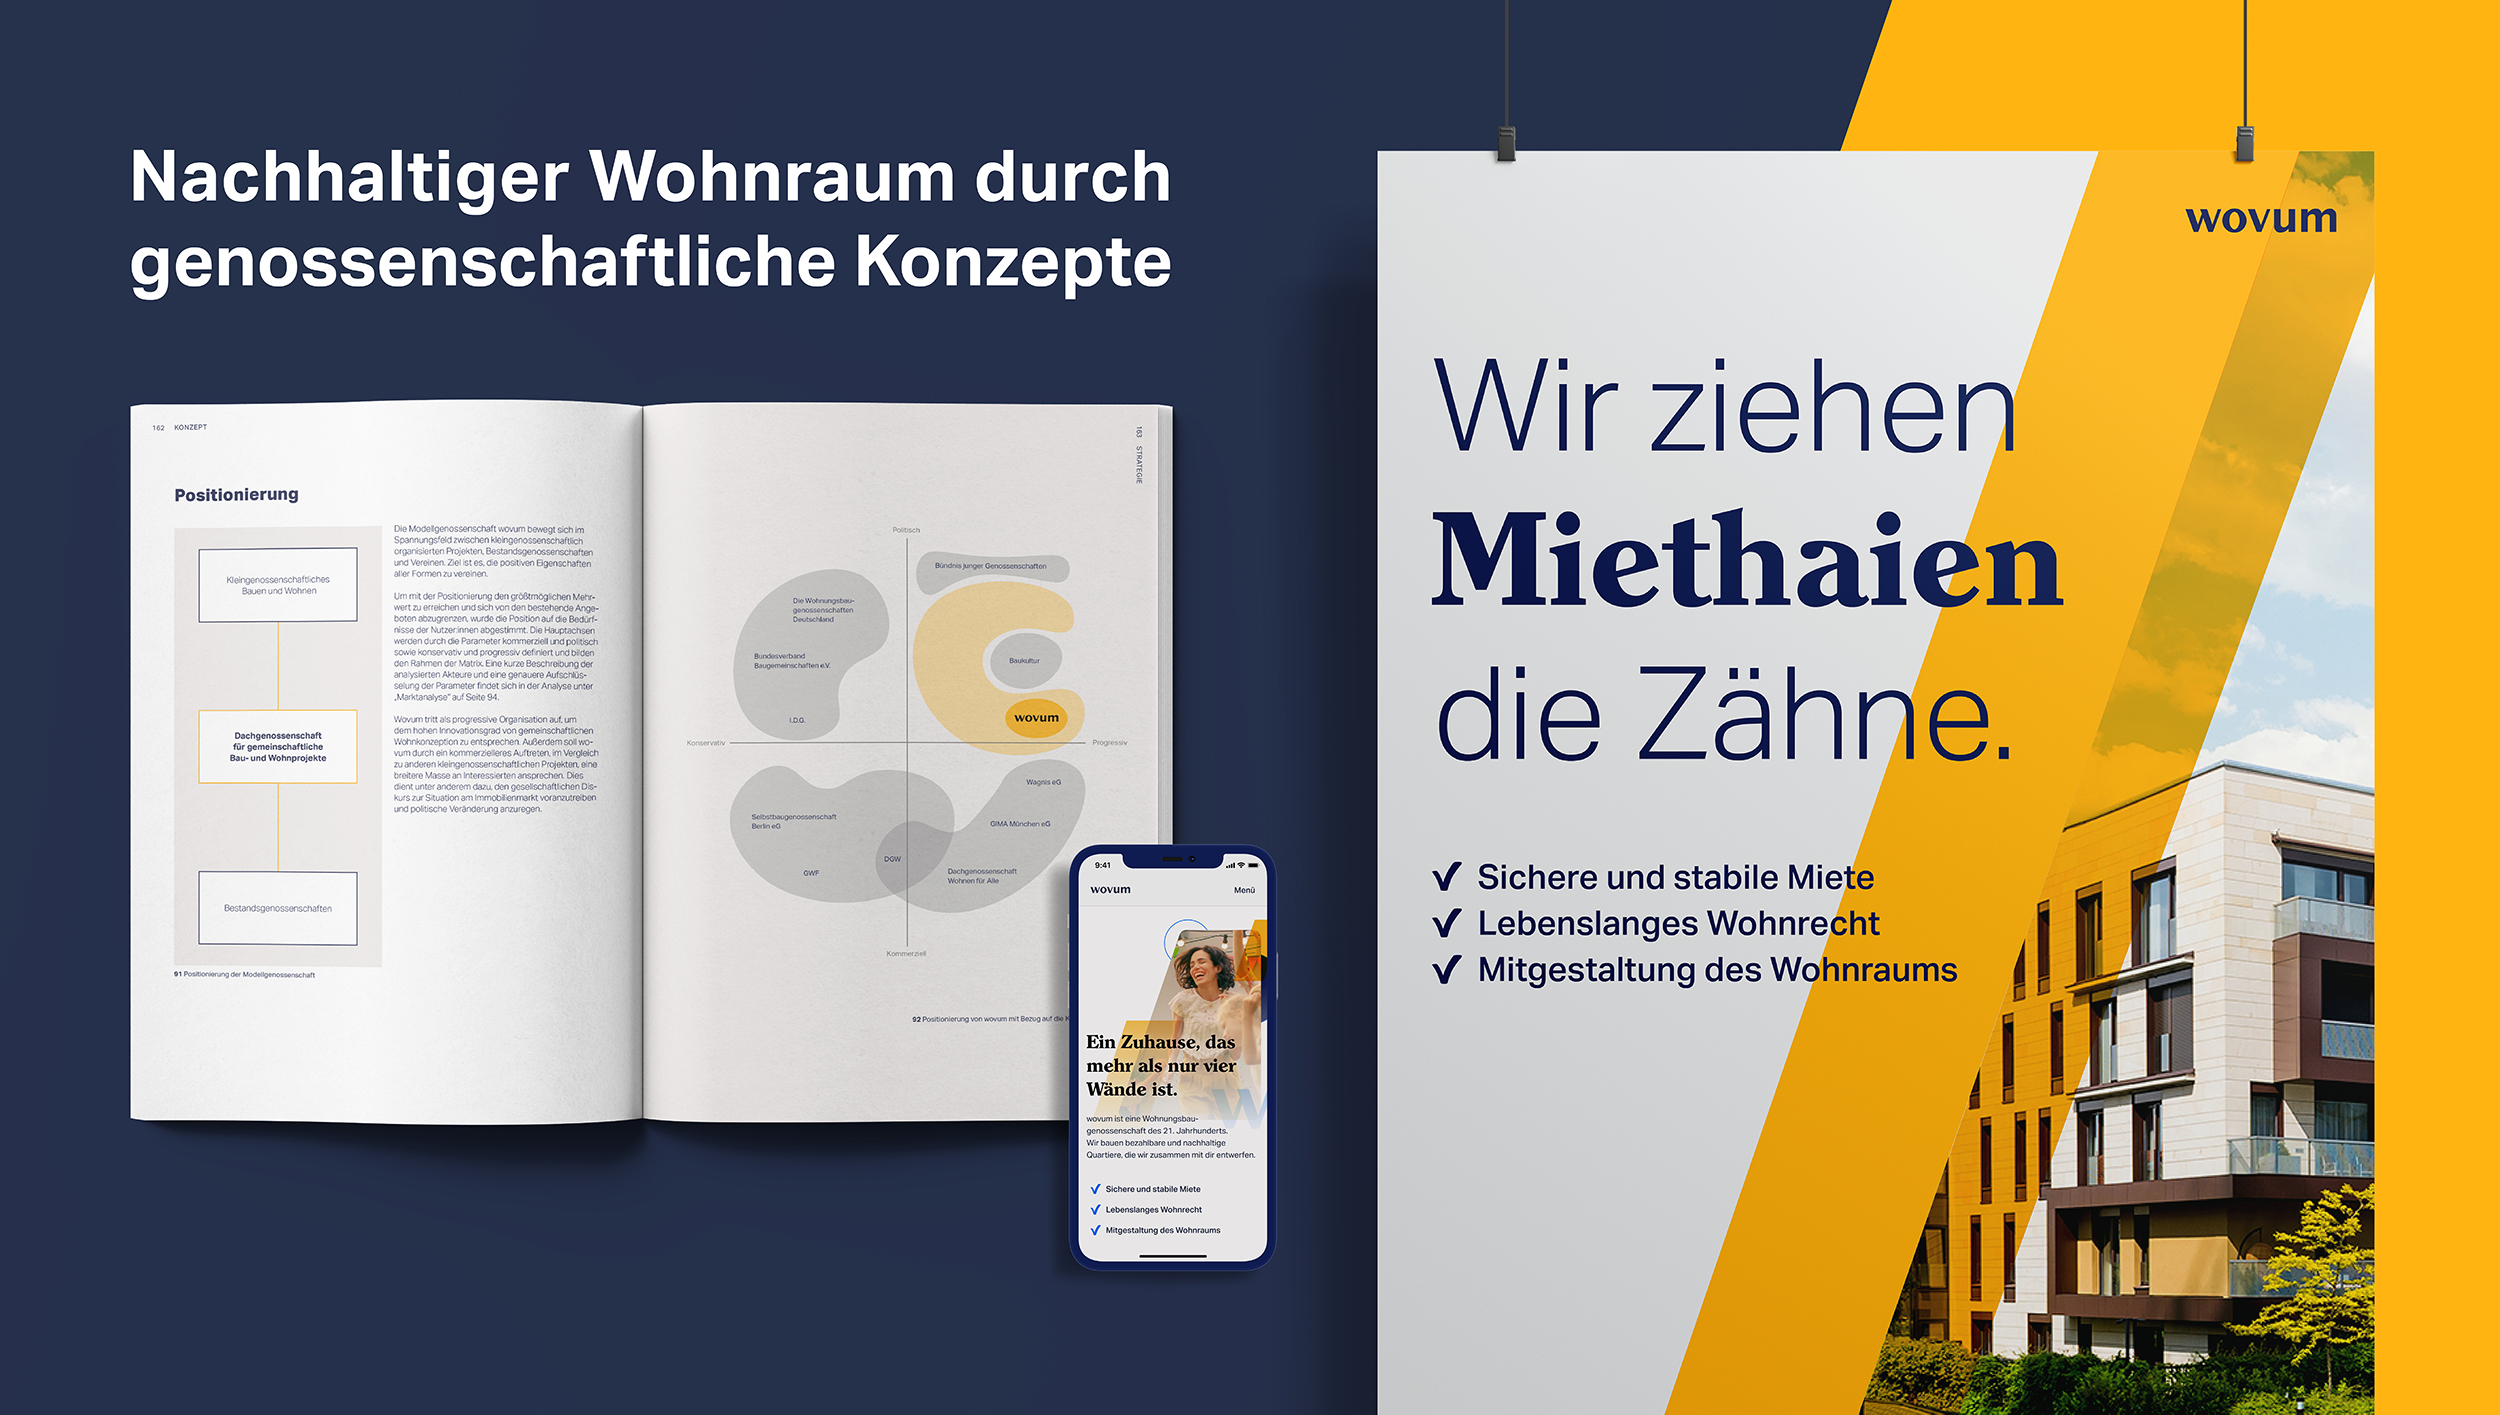 The key visual shows a flatlay of the printed documentation, a mobile view of the wovum landing page as well as a hanging poster mockup.